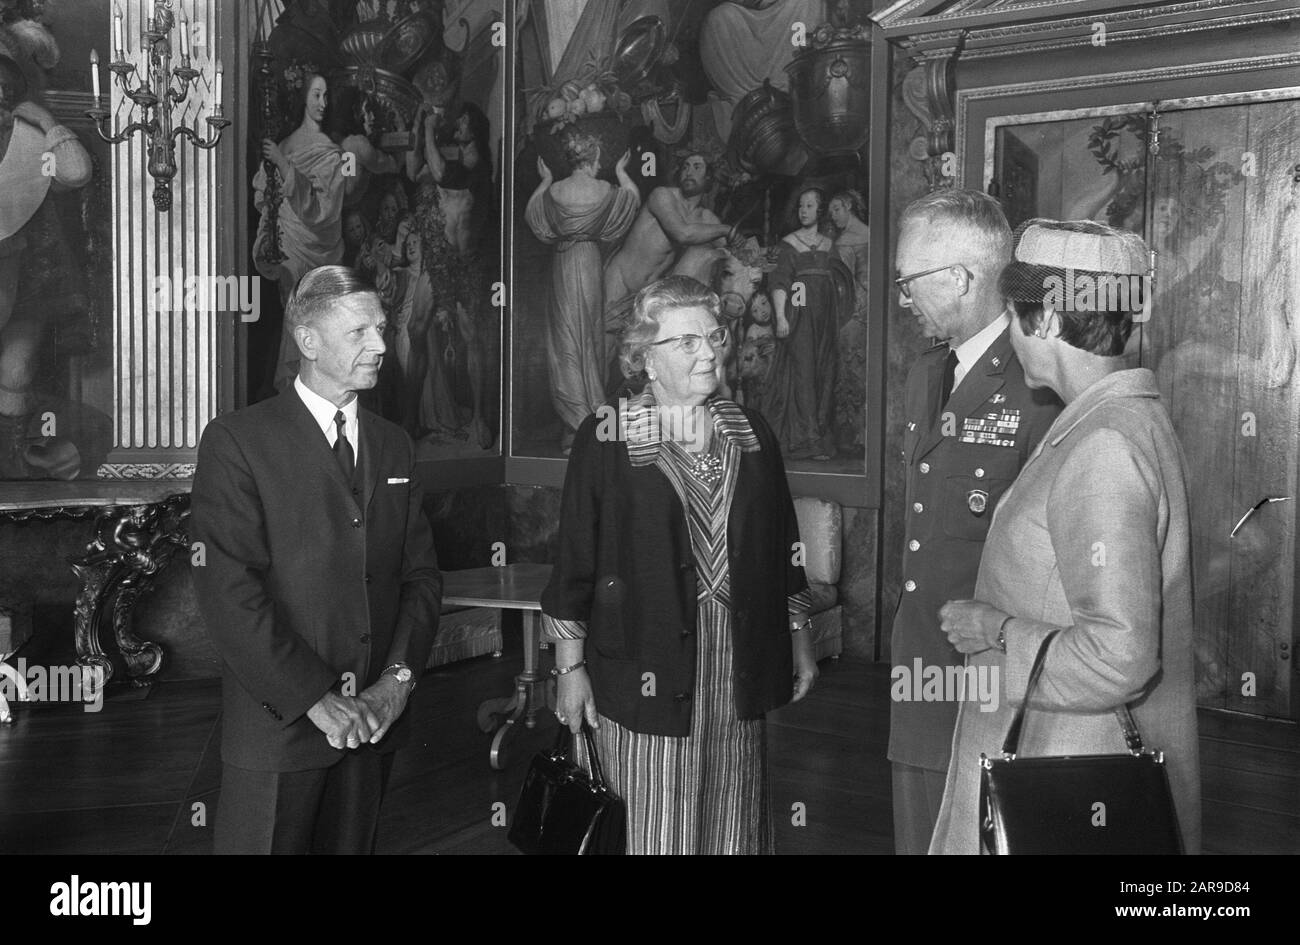 Queen Juliana receives General Goodpaster and his wife at Huis ten Bosch, The Hague   V.l.n.r. Mininster of Defense Den Toom, Queen Juliana, General Andrew J. Goodpaster and Mrs. Goodpaster Date: 8 September 1969 Location: The Hague, Zuid-Holland Keywords: generals, queens, ministers, receipts Personal name: Goodpaster, Andrew Jackson, Juliana, queen, Toom, Willem den Institutionname: Huis Ten Bosch Stock Photo